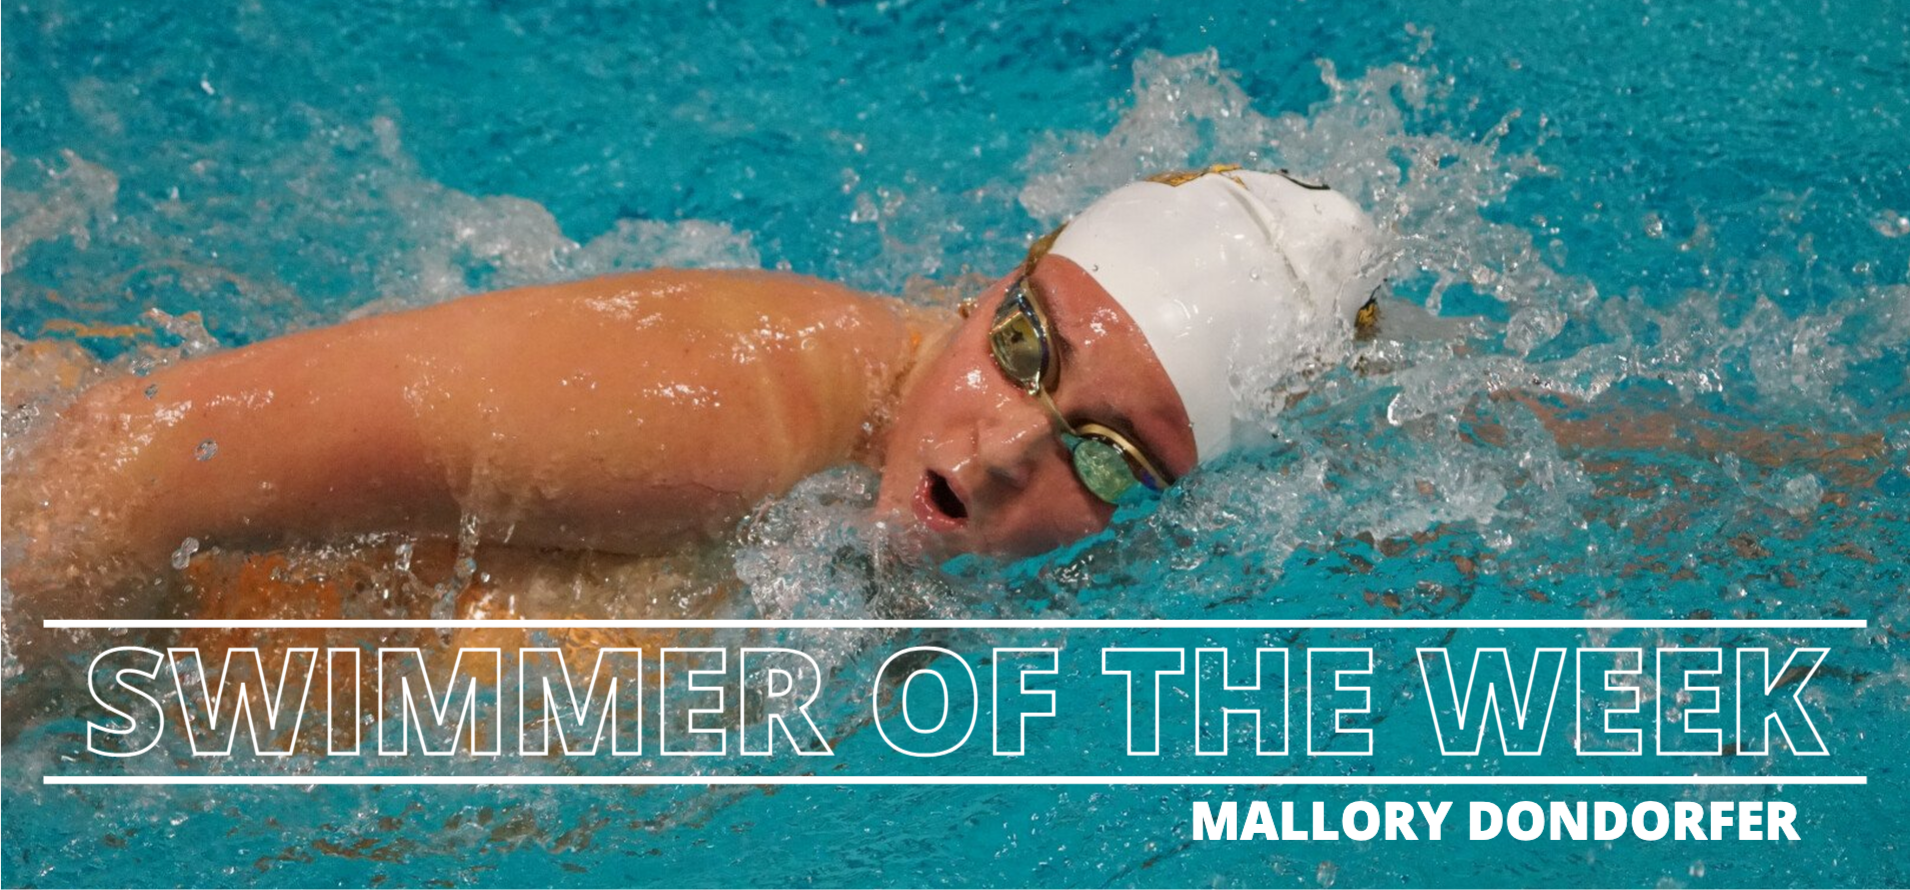 Dondorfer Claims Second Career OAC Women’s Swimmer of the Week Accolade